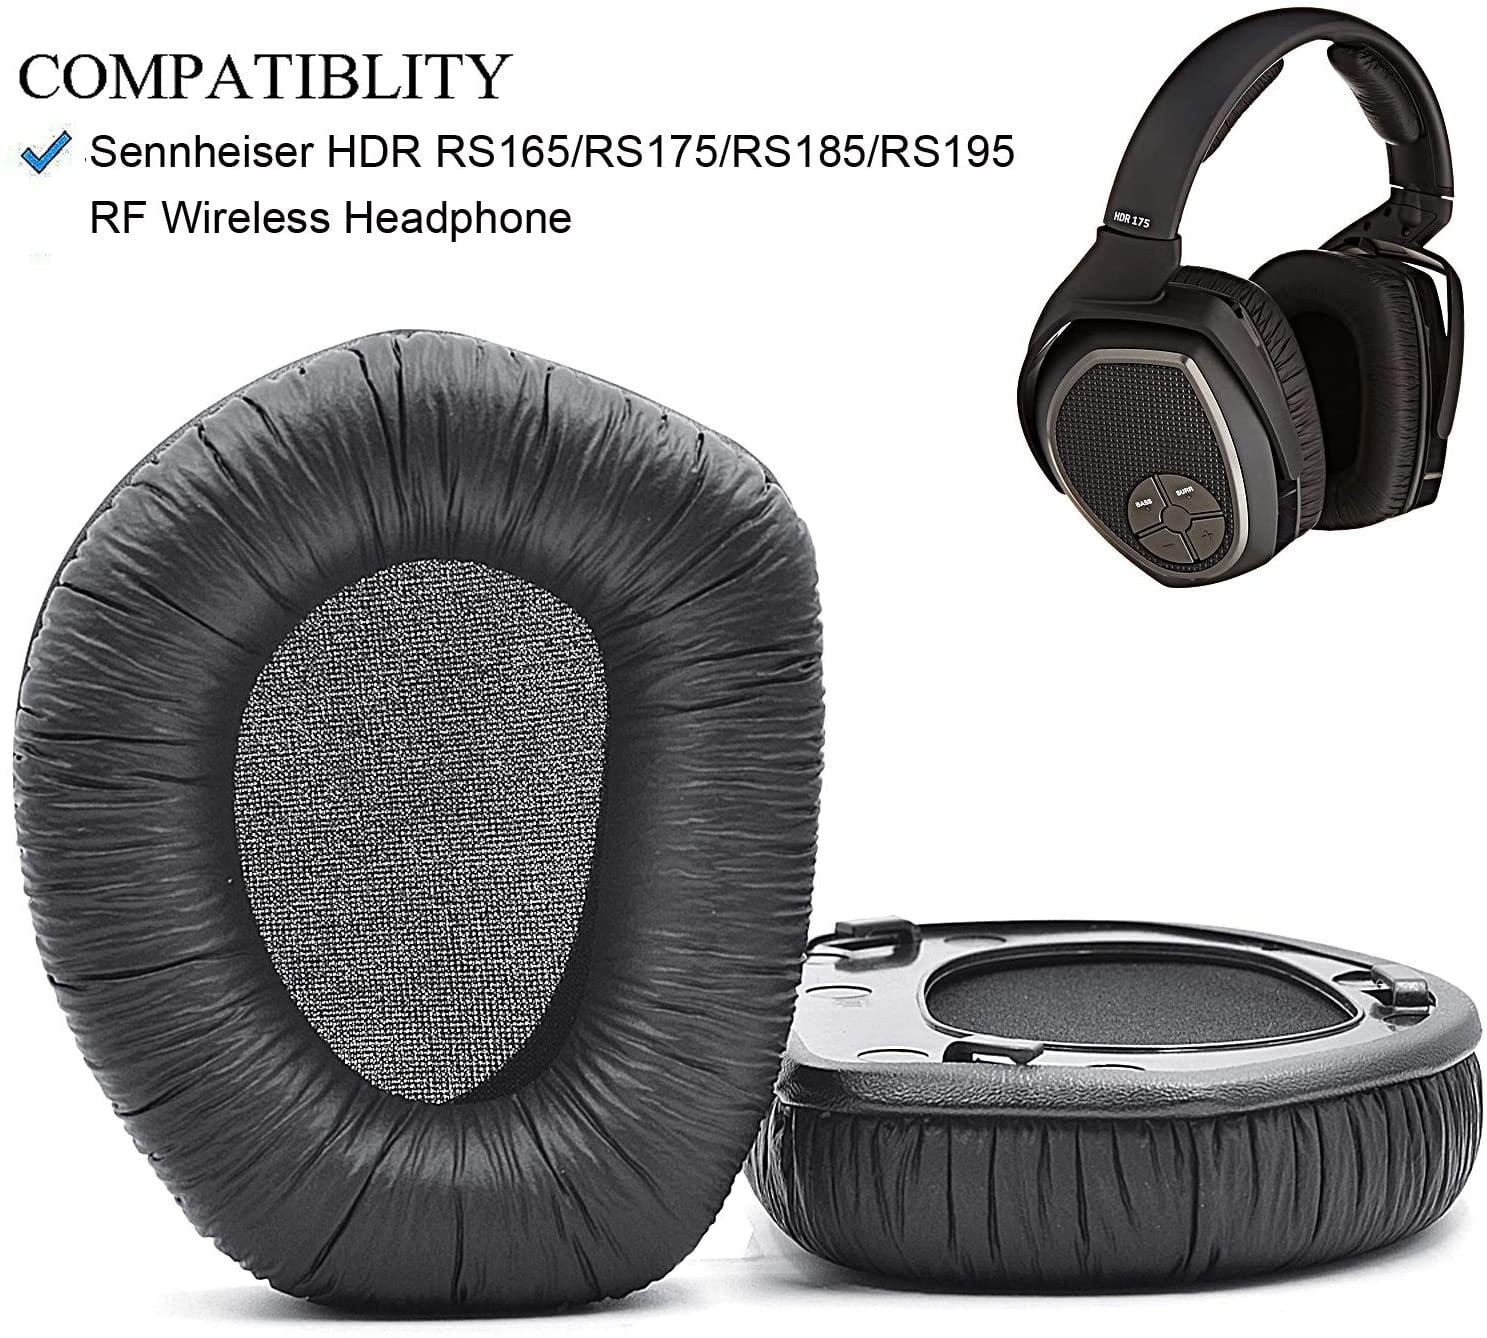 Velvet RS165 RS175 Ear Cushions Ear Pads Replacement Compatible with Sennheiser HDR 165 175 185 RS195 185 Wireless Headphone